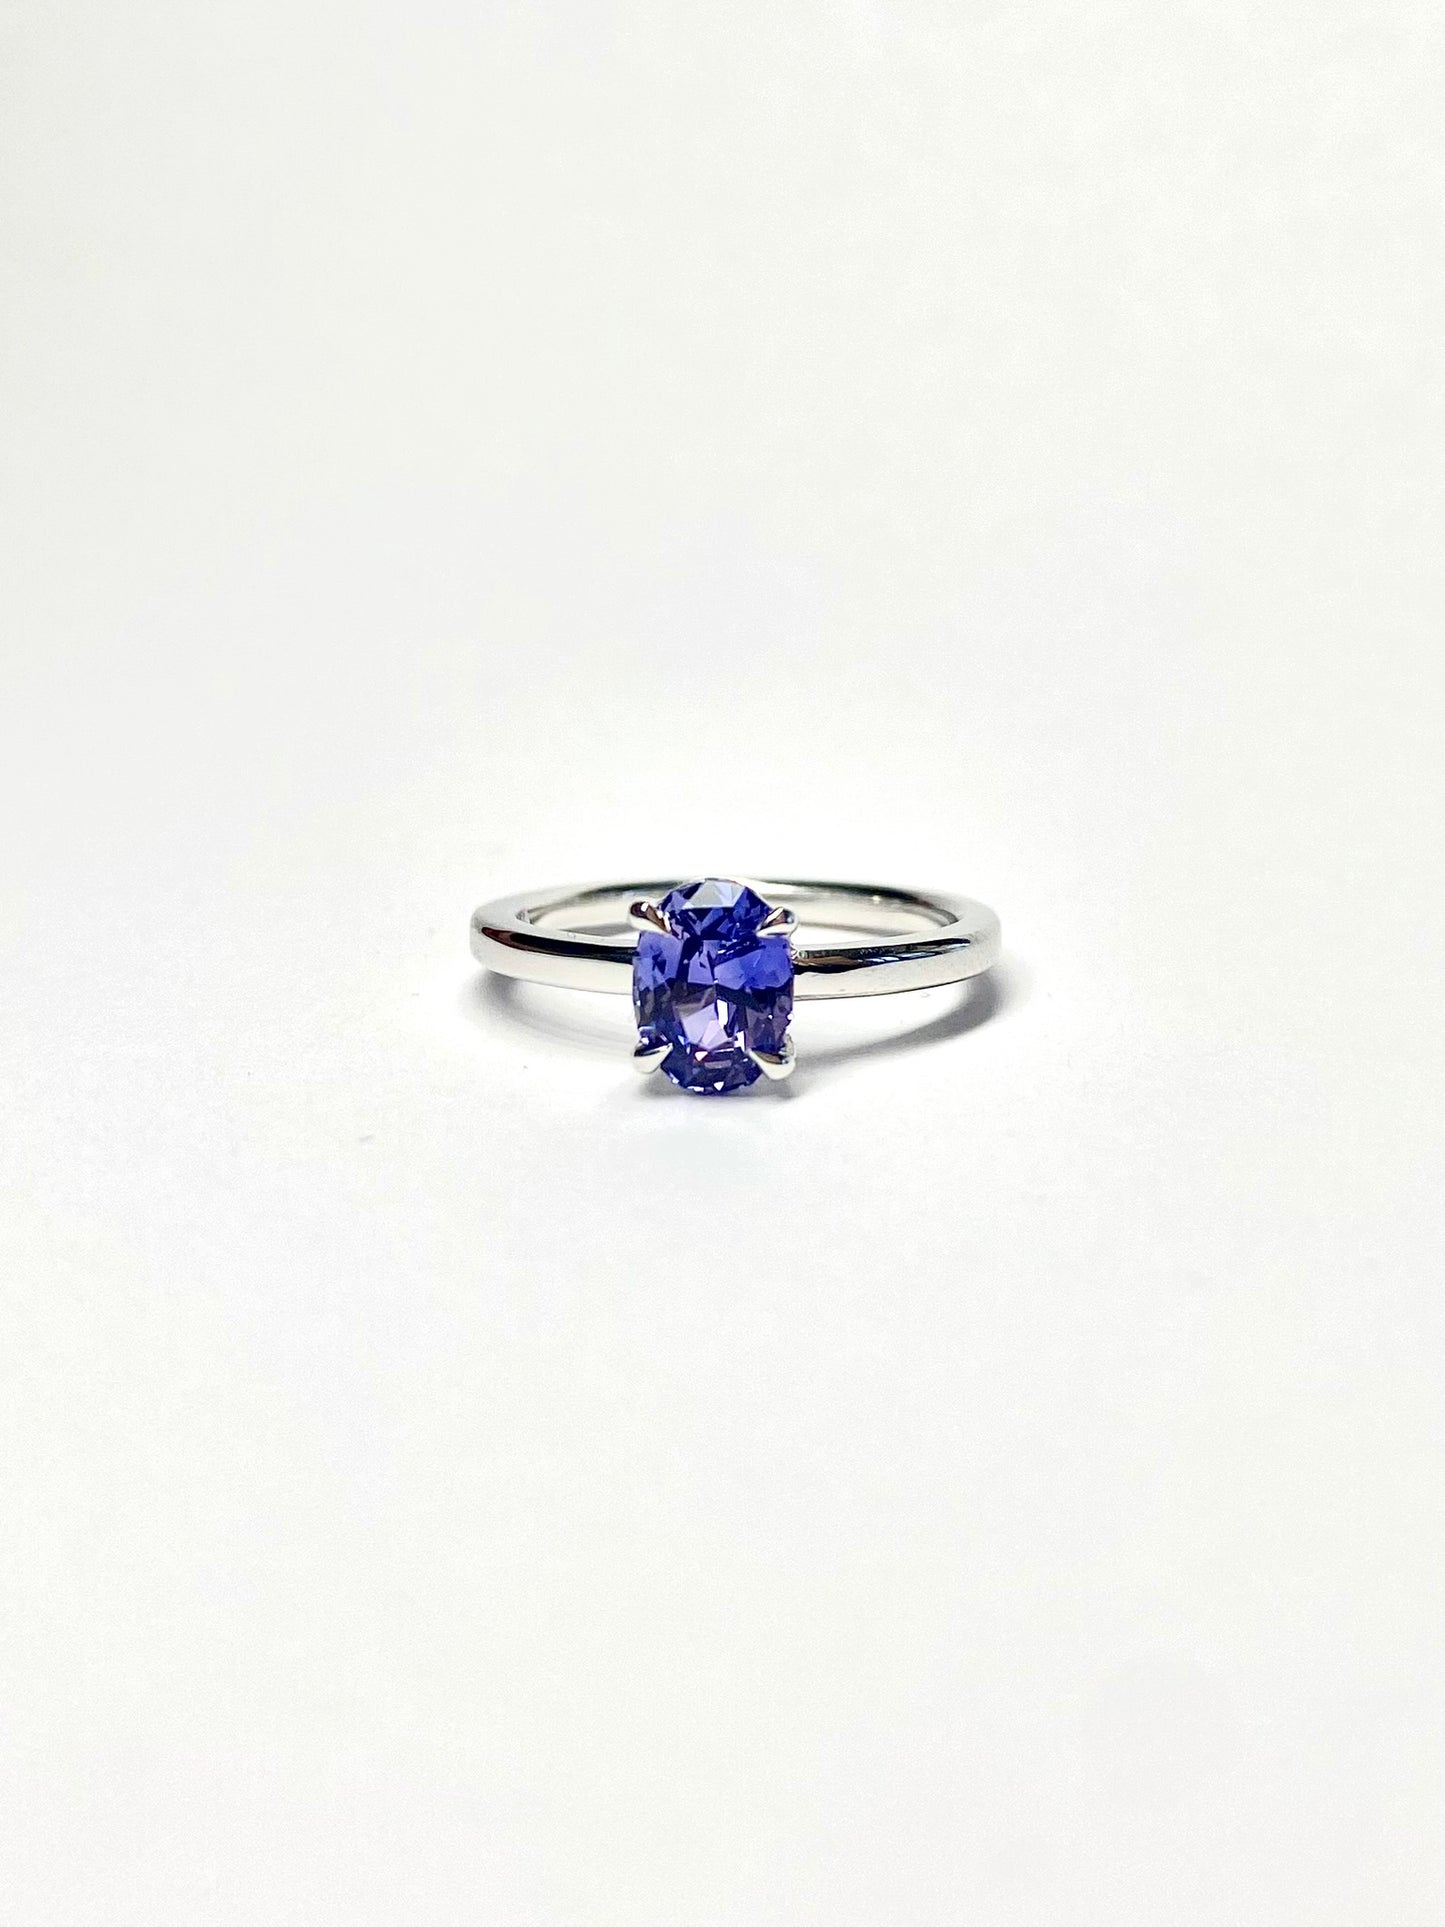 Periwinkle Solitaire Sapphire Ring